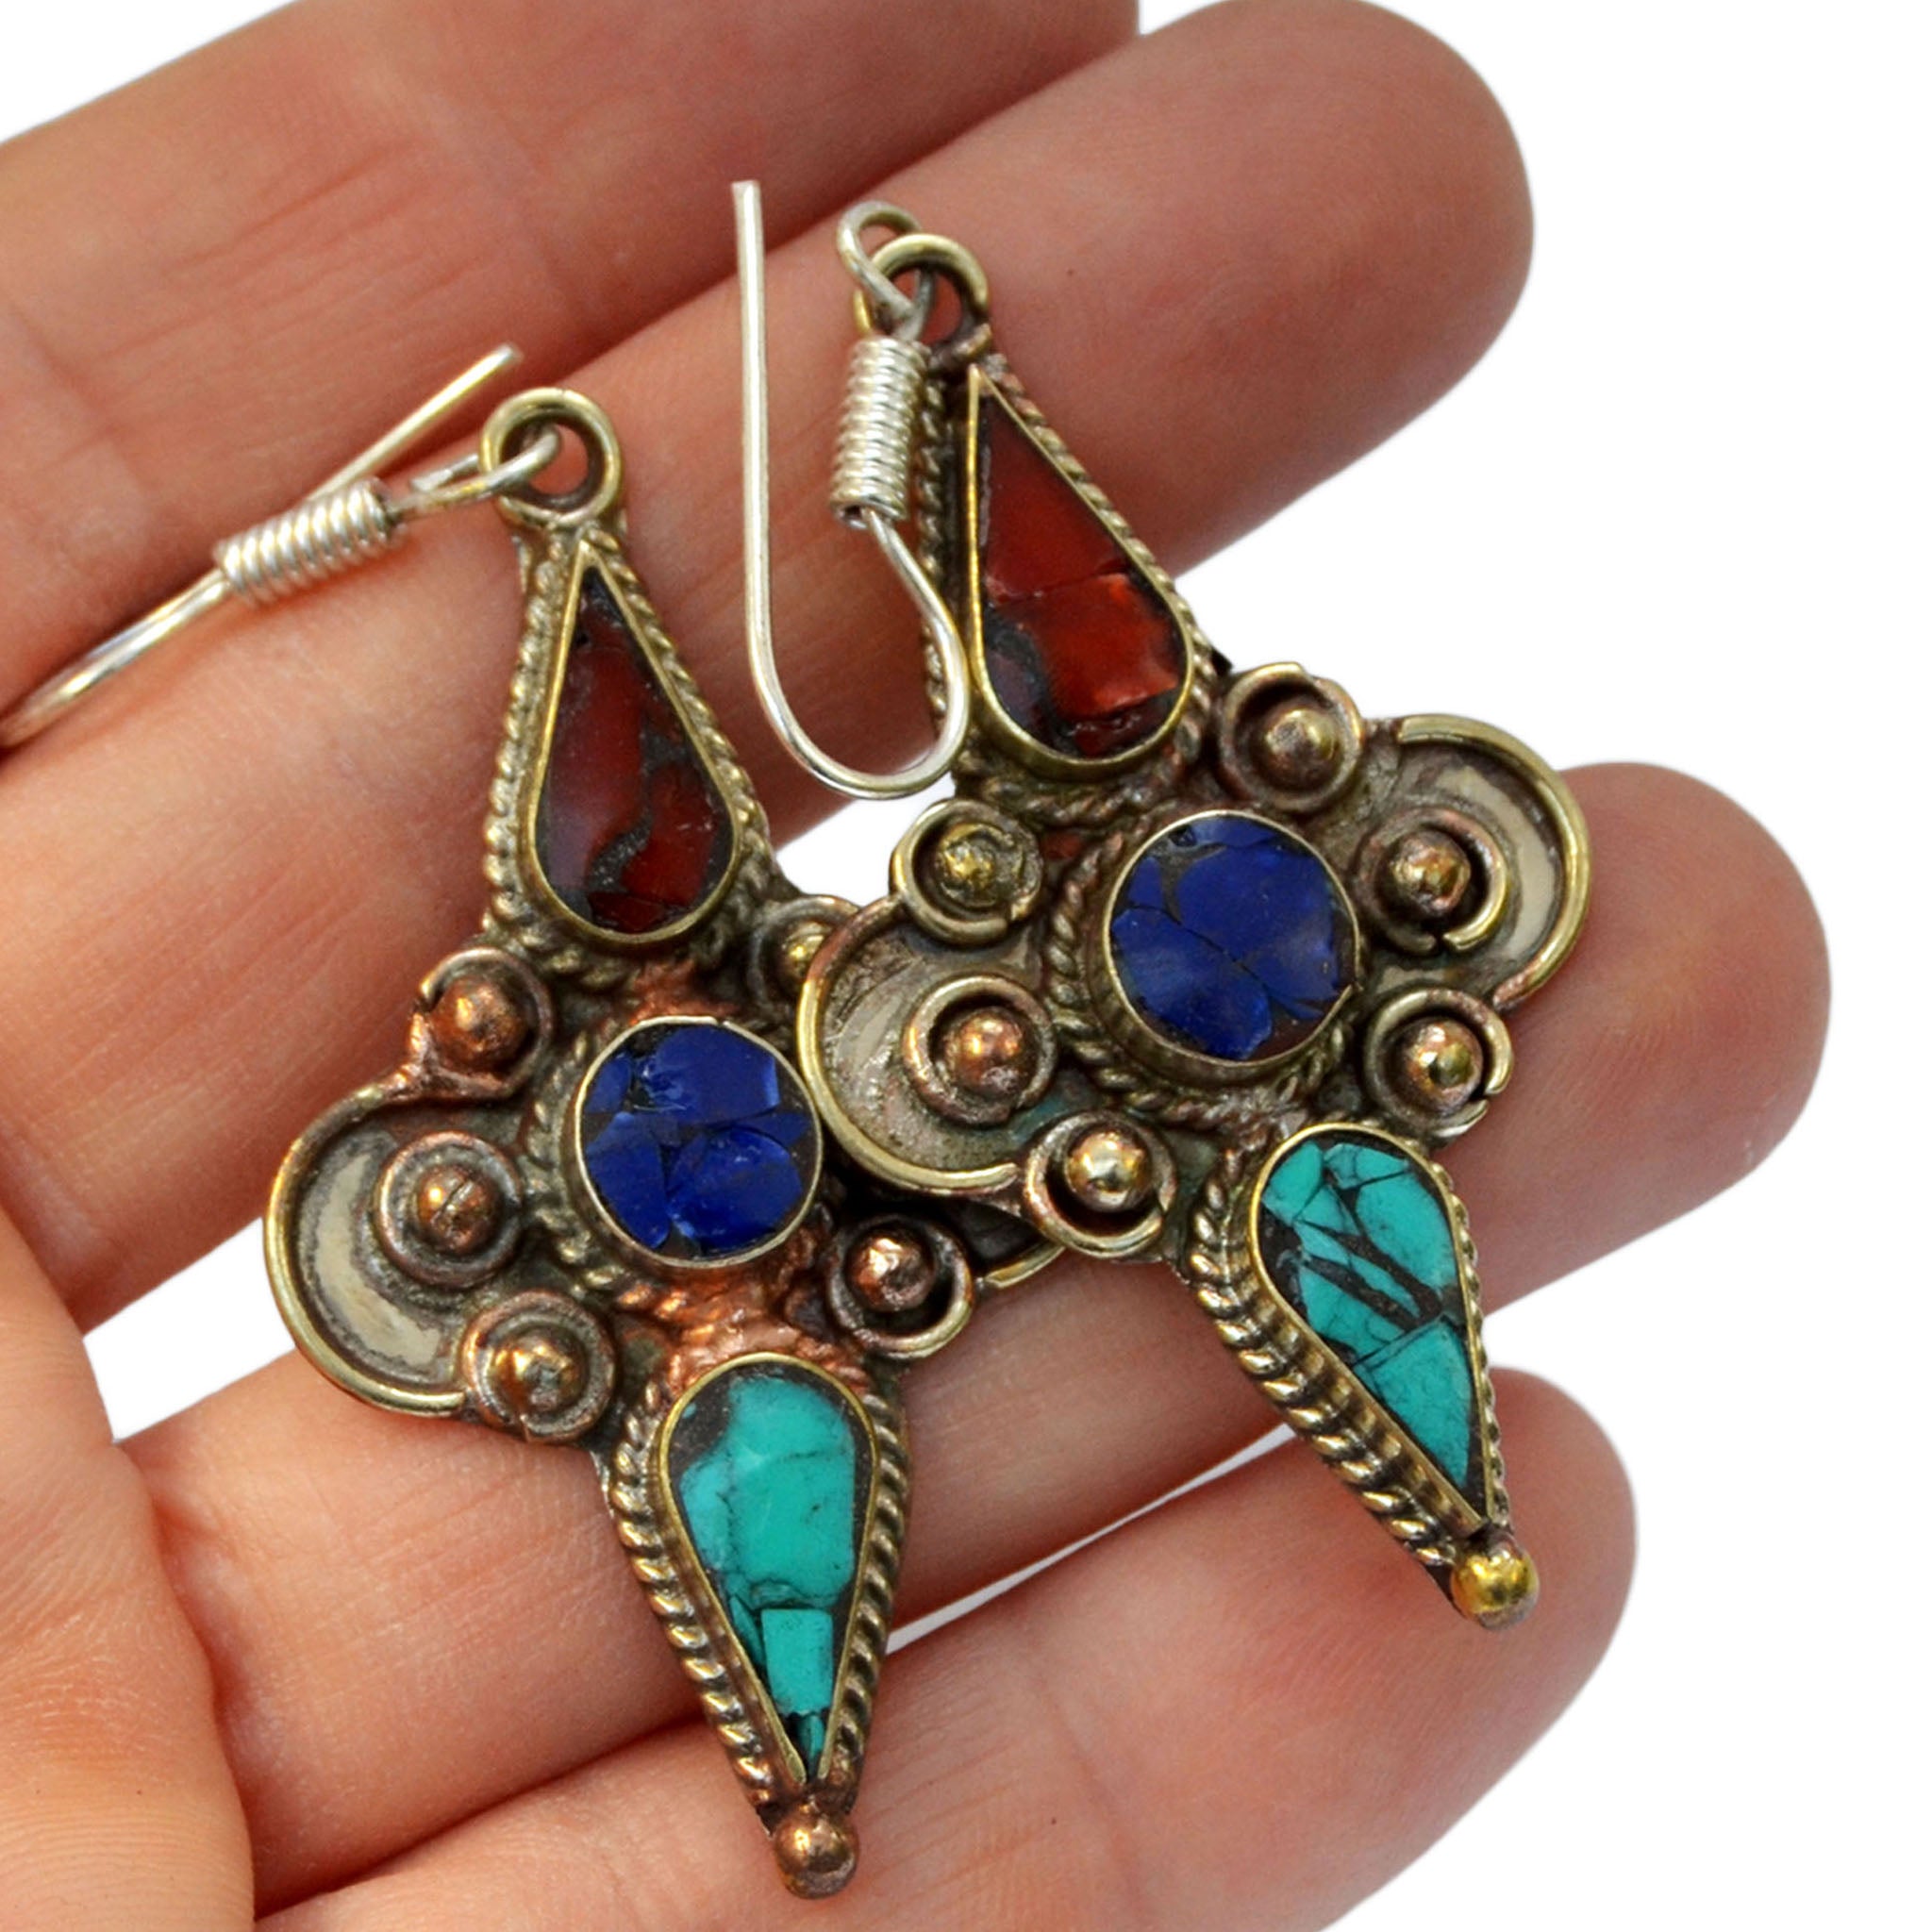 Silver tibetan earrings with inlay turquoise, lapis lazuli and red coral stones on hand